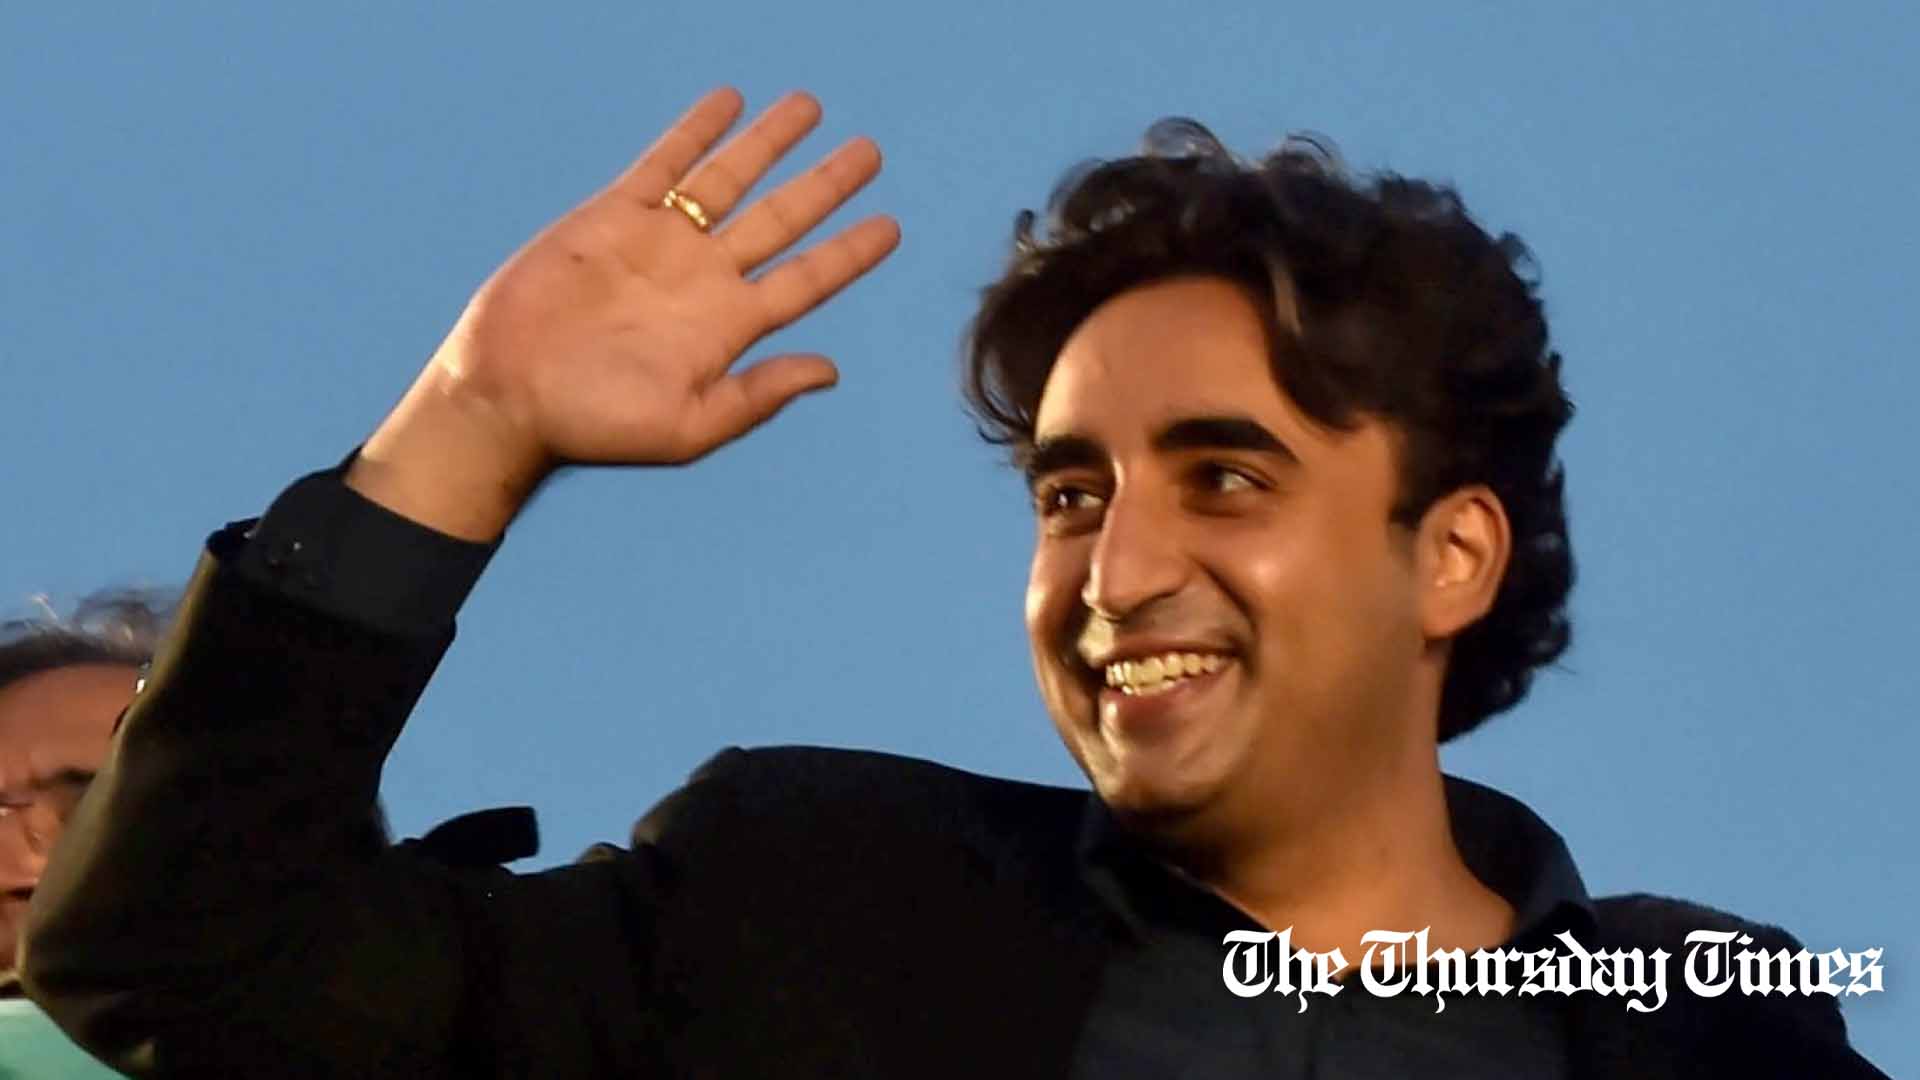 A file photo is shown of foreign minister Bilawal Bhutto-Zardari.